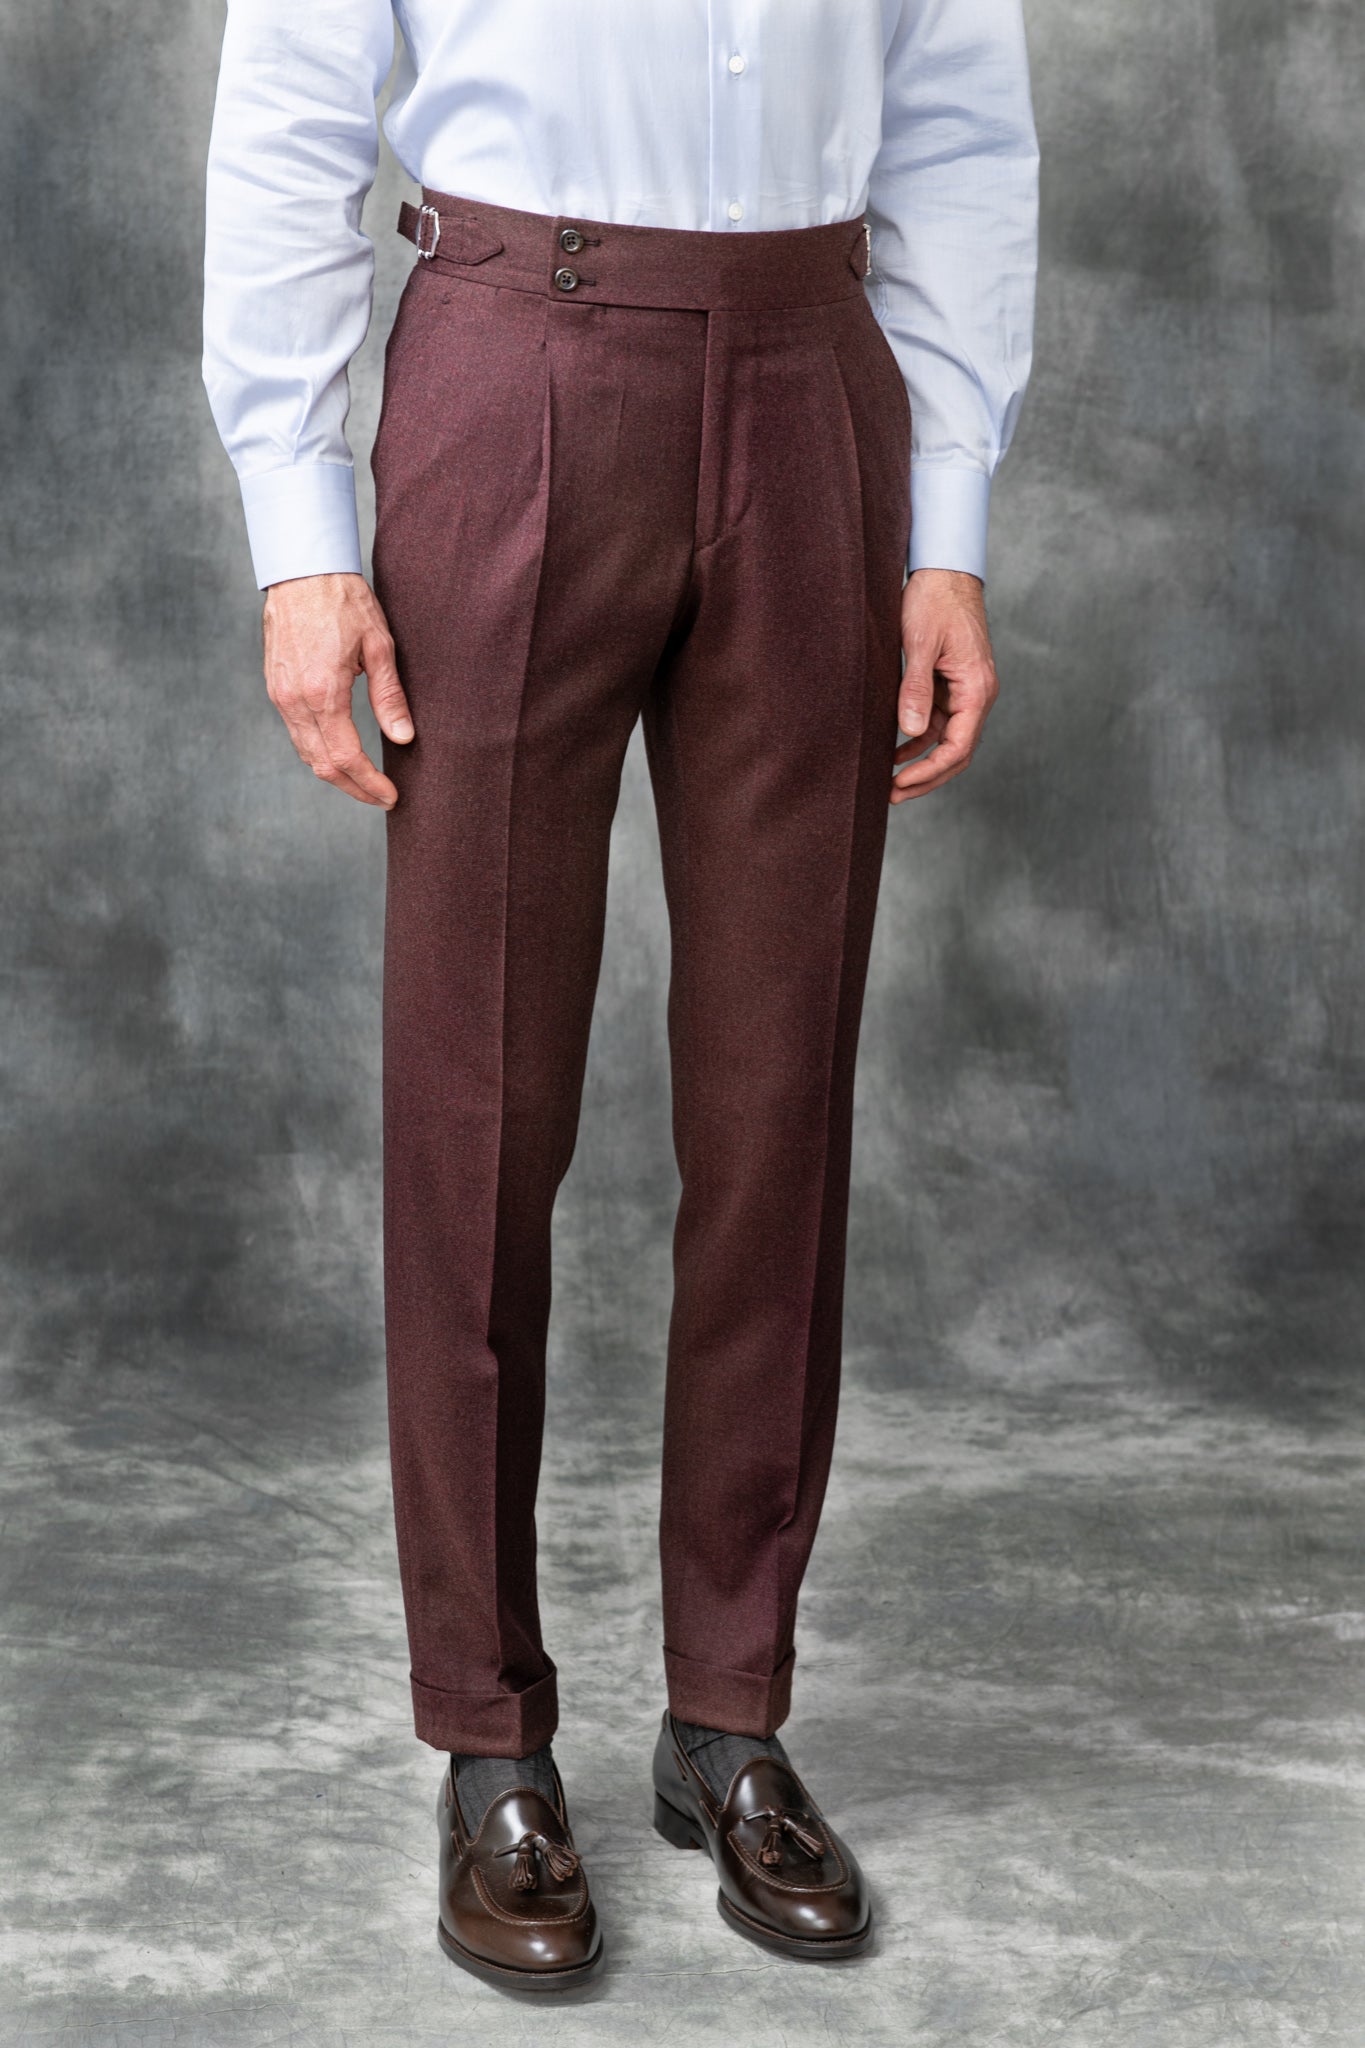 Flannel trousers, bordeaux trousers, sartorial trousers, italian style; pantalons en flanelle, pantalons bordeaux , pantalons sartoriaux, style italien , pantalons fabriqués en Italie, pantaloni in flanella, pantaloni bordeaux , pantaloni sartoriali, stile italiano; pantaloni made in italy, winter trousers, chino trousers, pleated trousers, pantalon d'hiver, pantalon chino, pantalon à plis, pantalons gurkha, gurkha trousers, pantaloni gurka